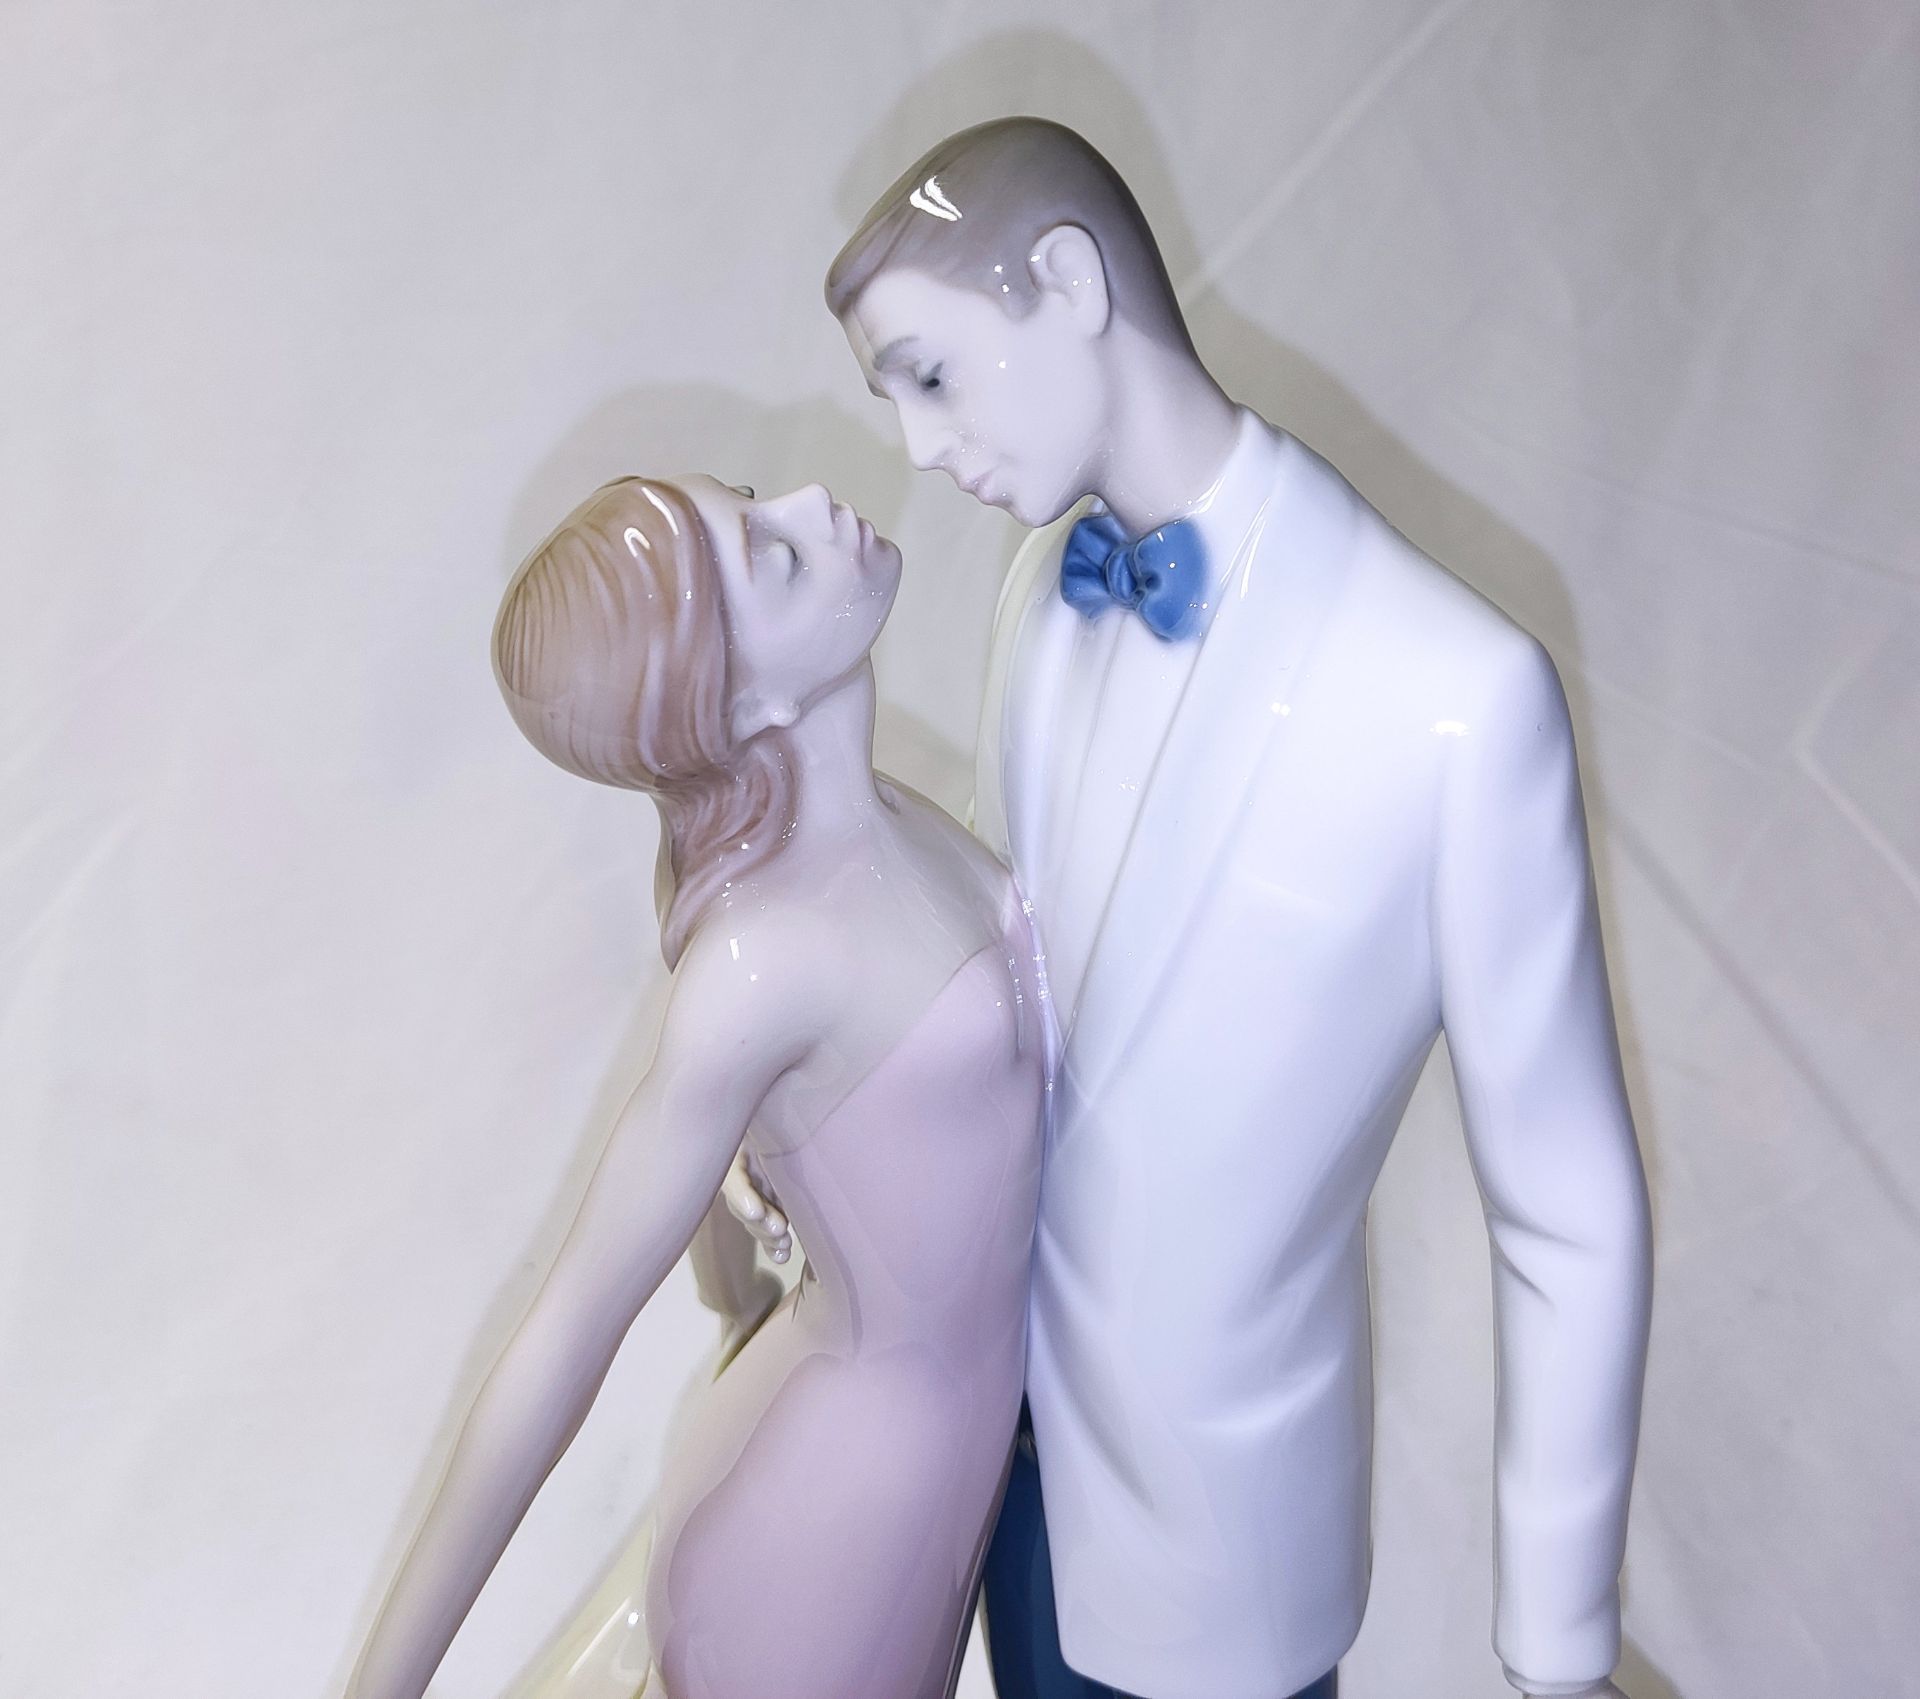 1 x LLADRO Happy Anniversary Porcelain Statue - New/Boxed - RRP £520.00 - Ref: /HOC232/HC5 - CL987 - - Image 8 of 25